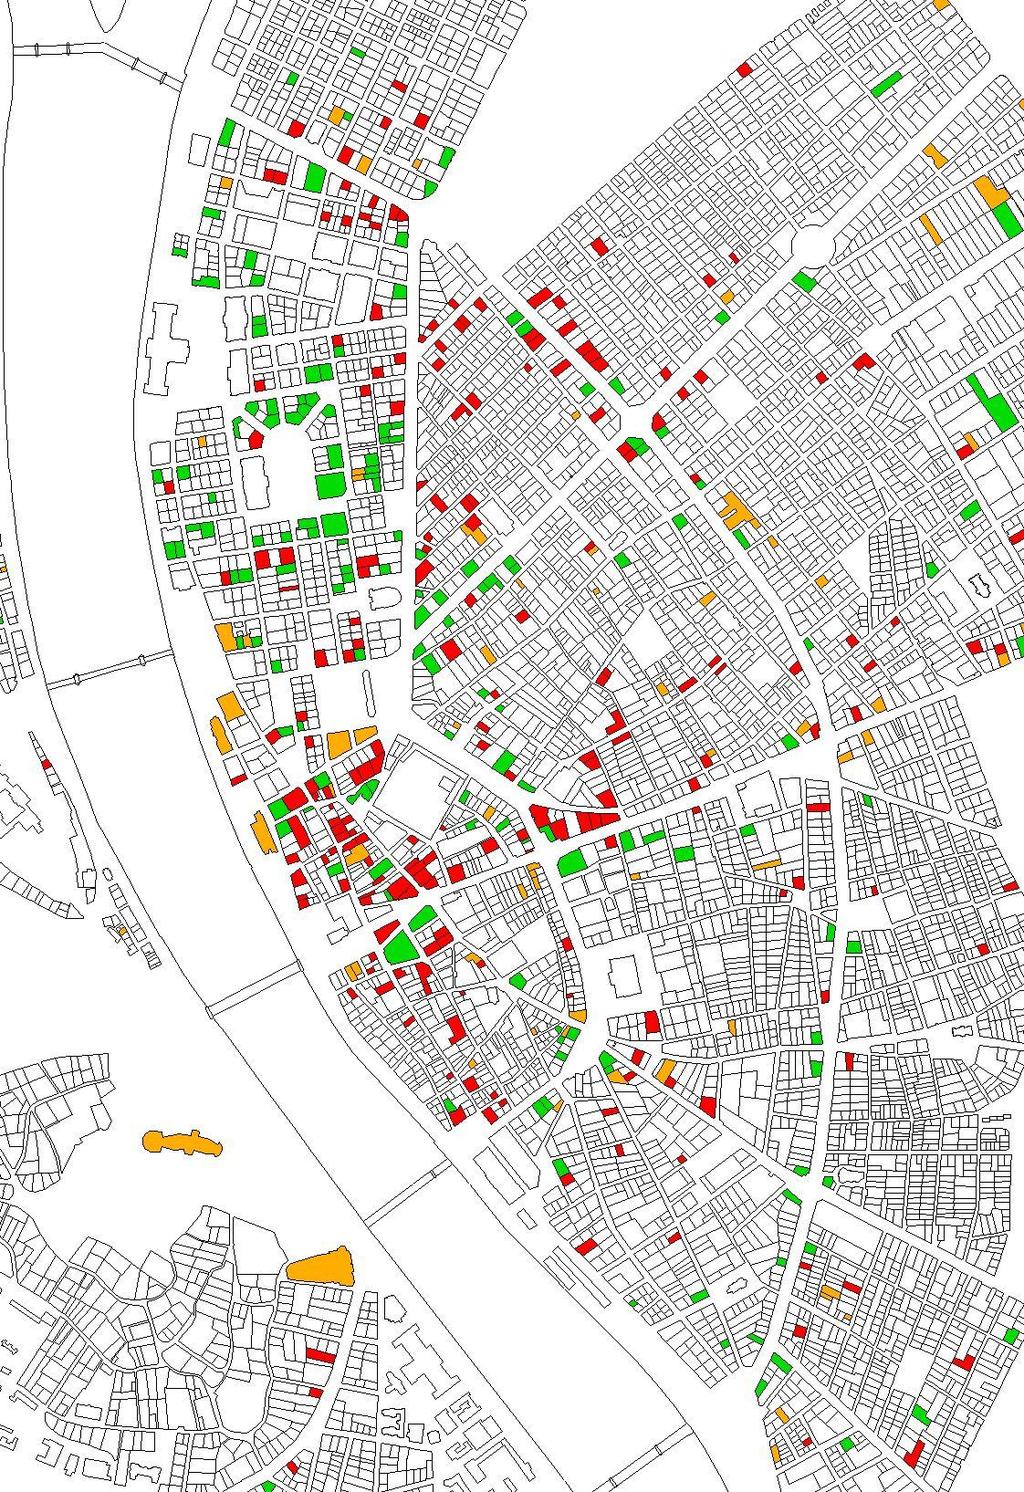 Densification of cityfunctions in